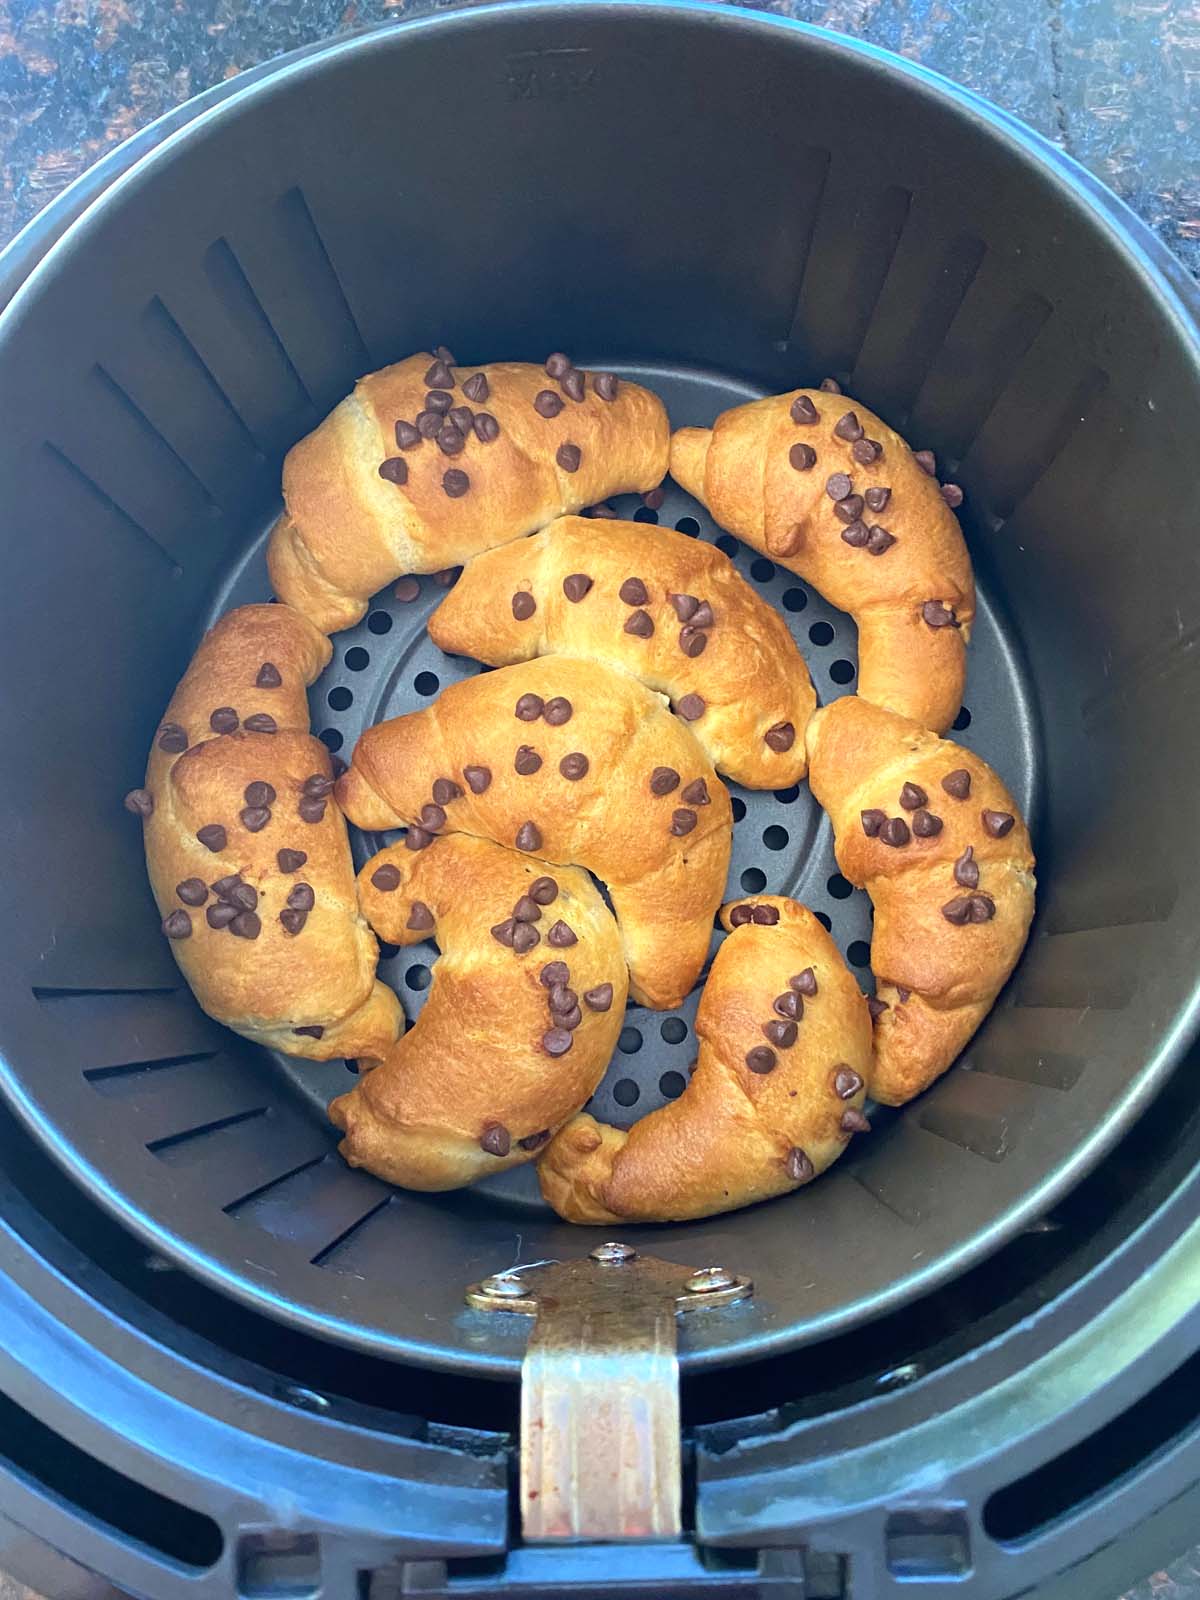 Chocolate croissants in an air fryer.